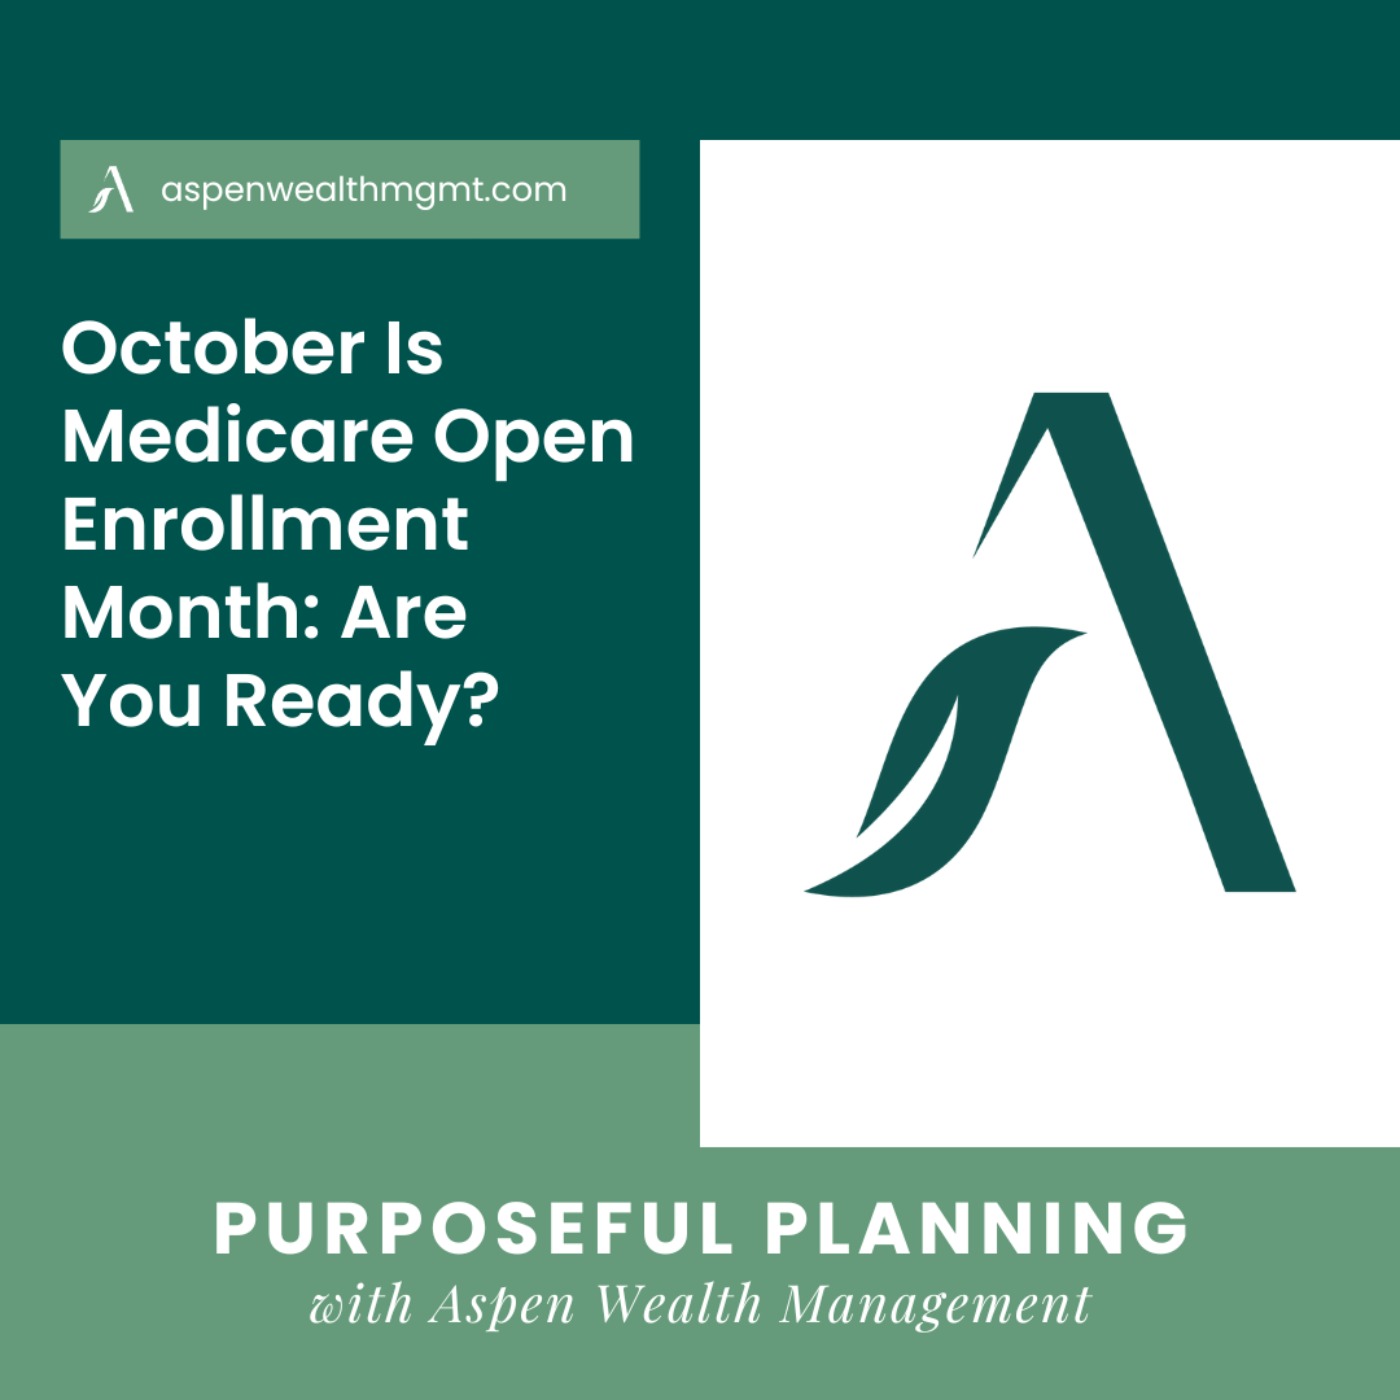 October Is Medicare Open Enrollment Month: Are You Ready?